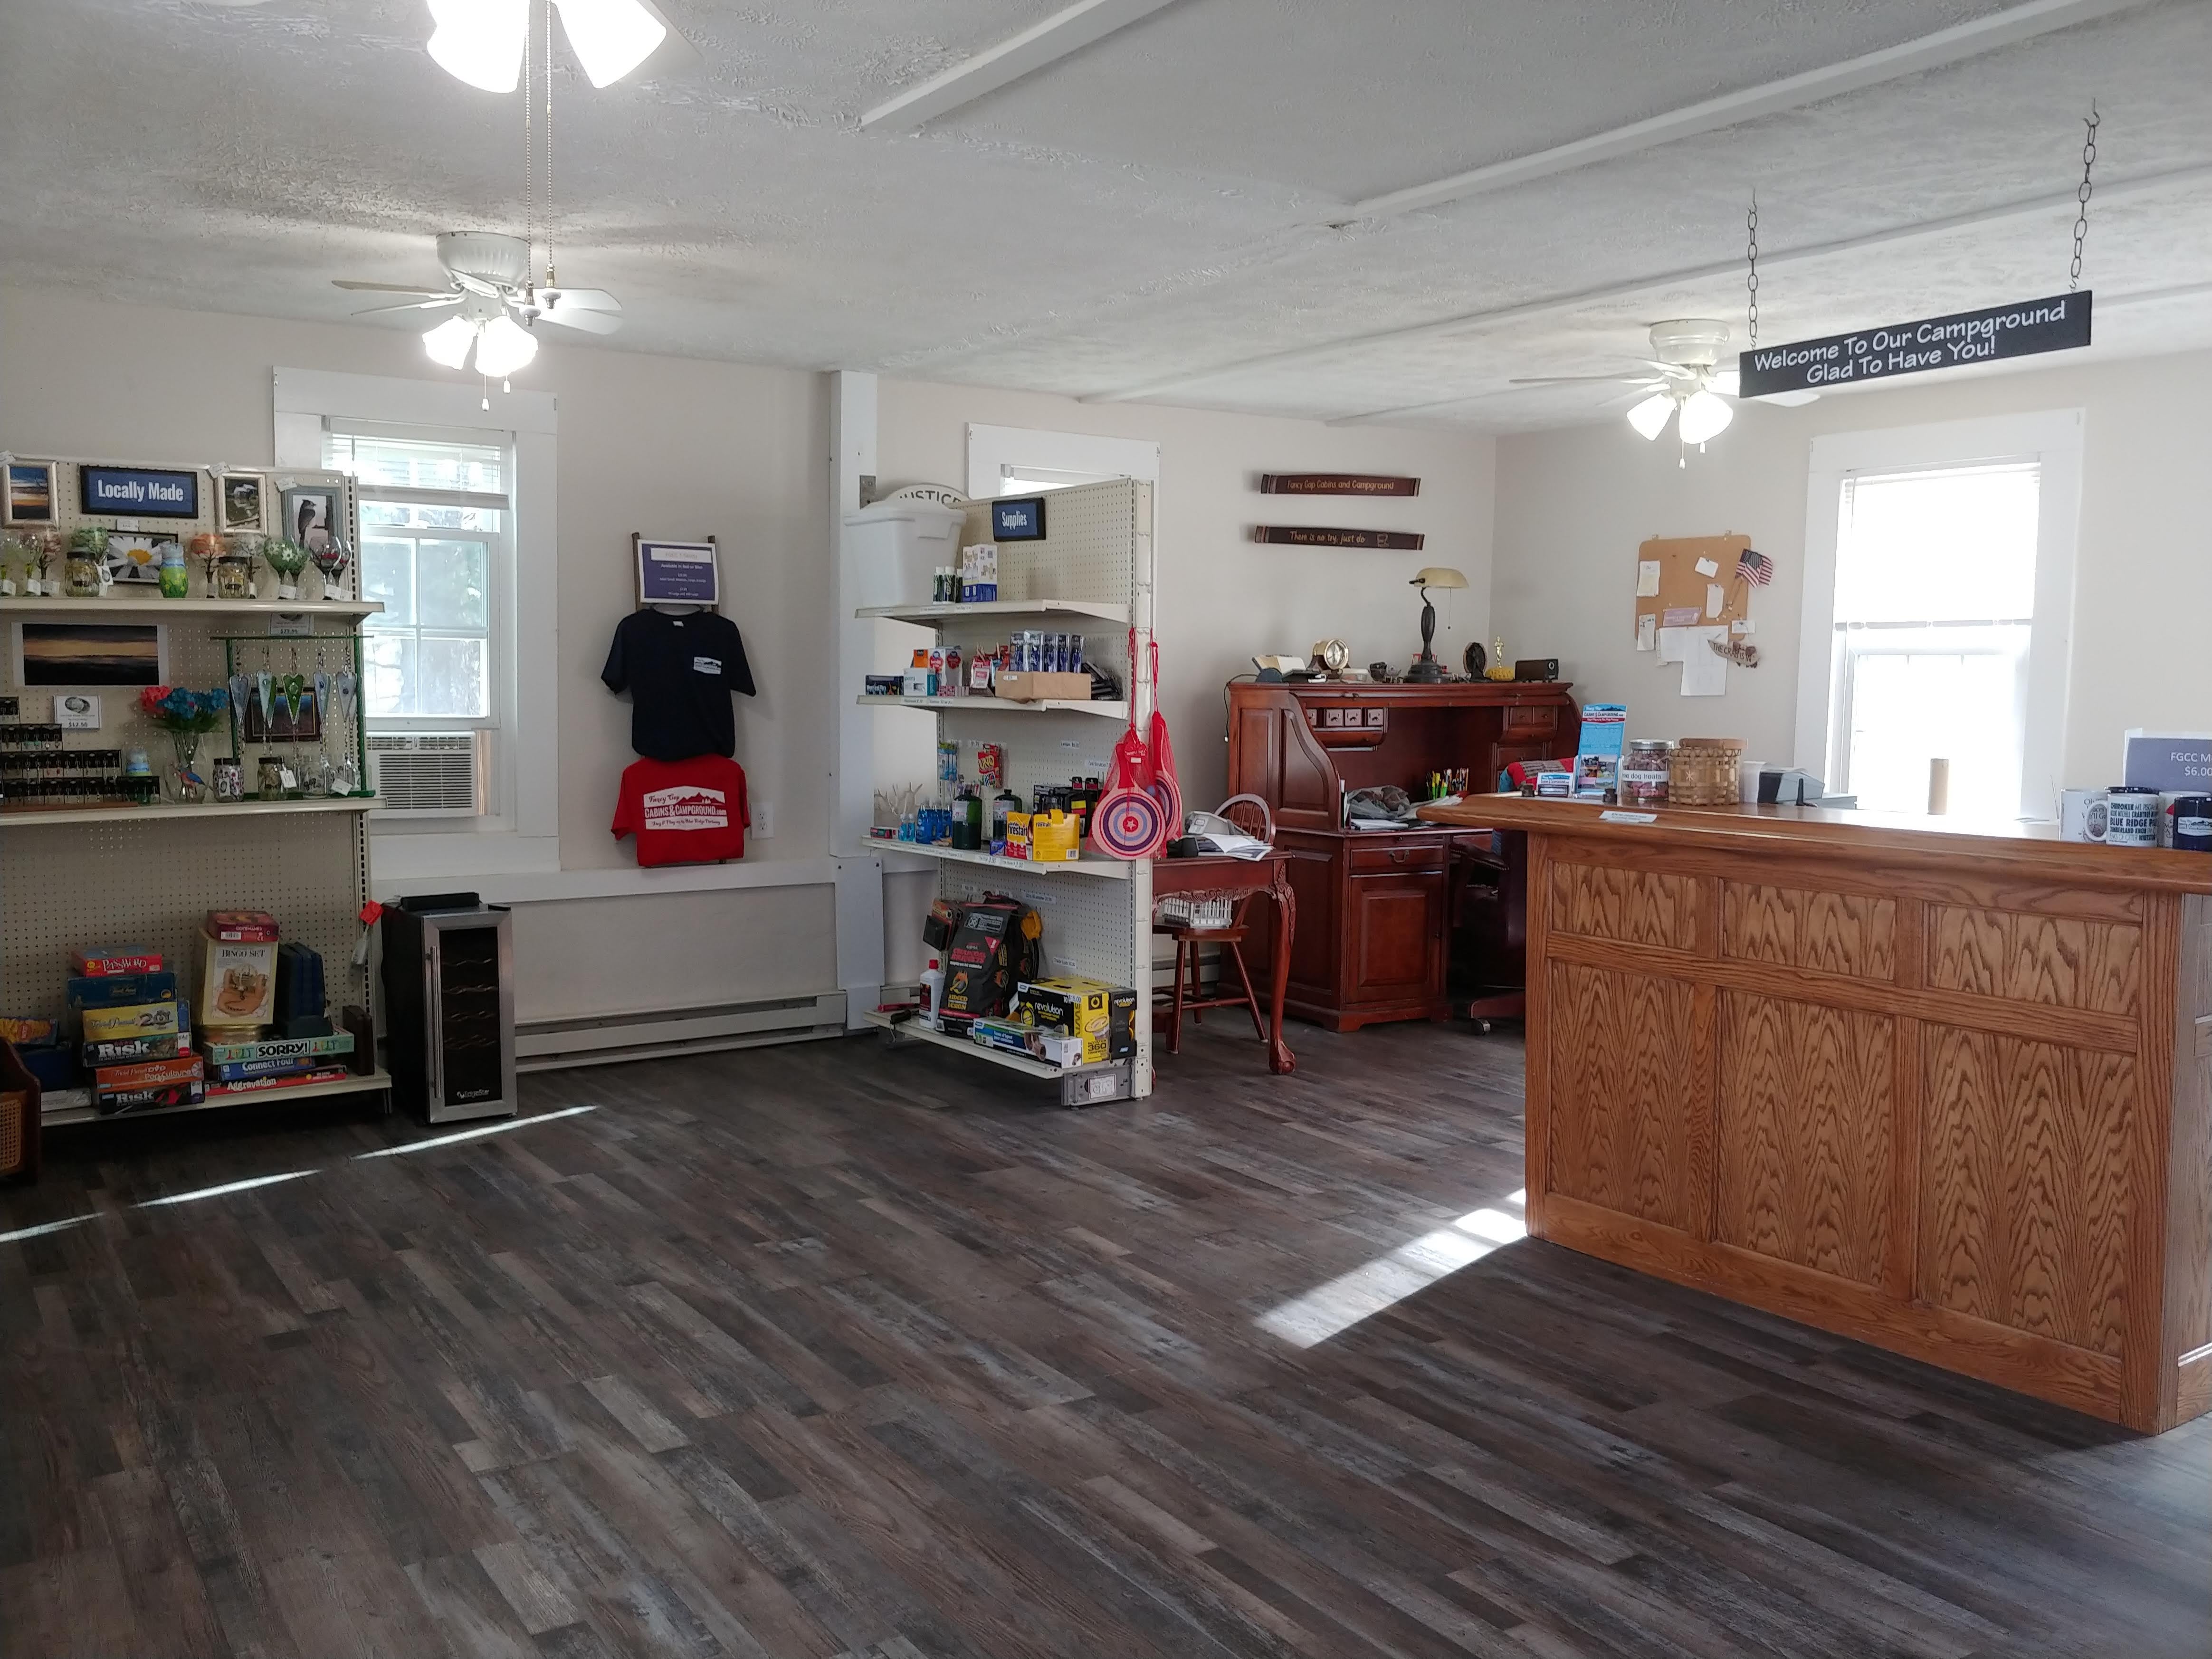 Our office/store is where you check in and pick up firewood, ice, Hershey's ice cream, a smores kit, books, locally made jewelry or gifts or the camping and RV supplies you left behind.